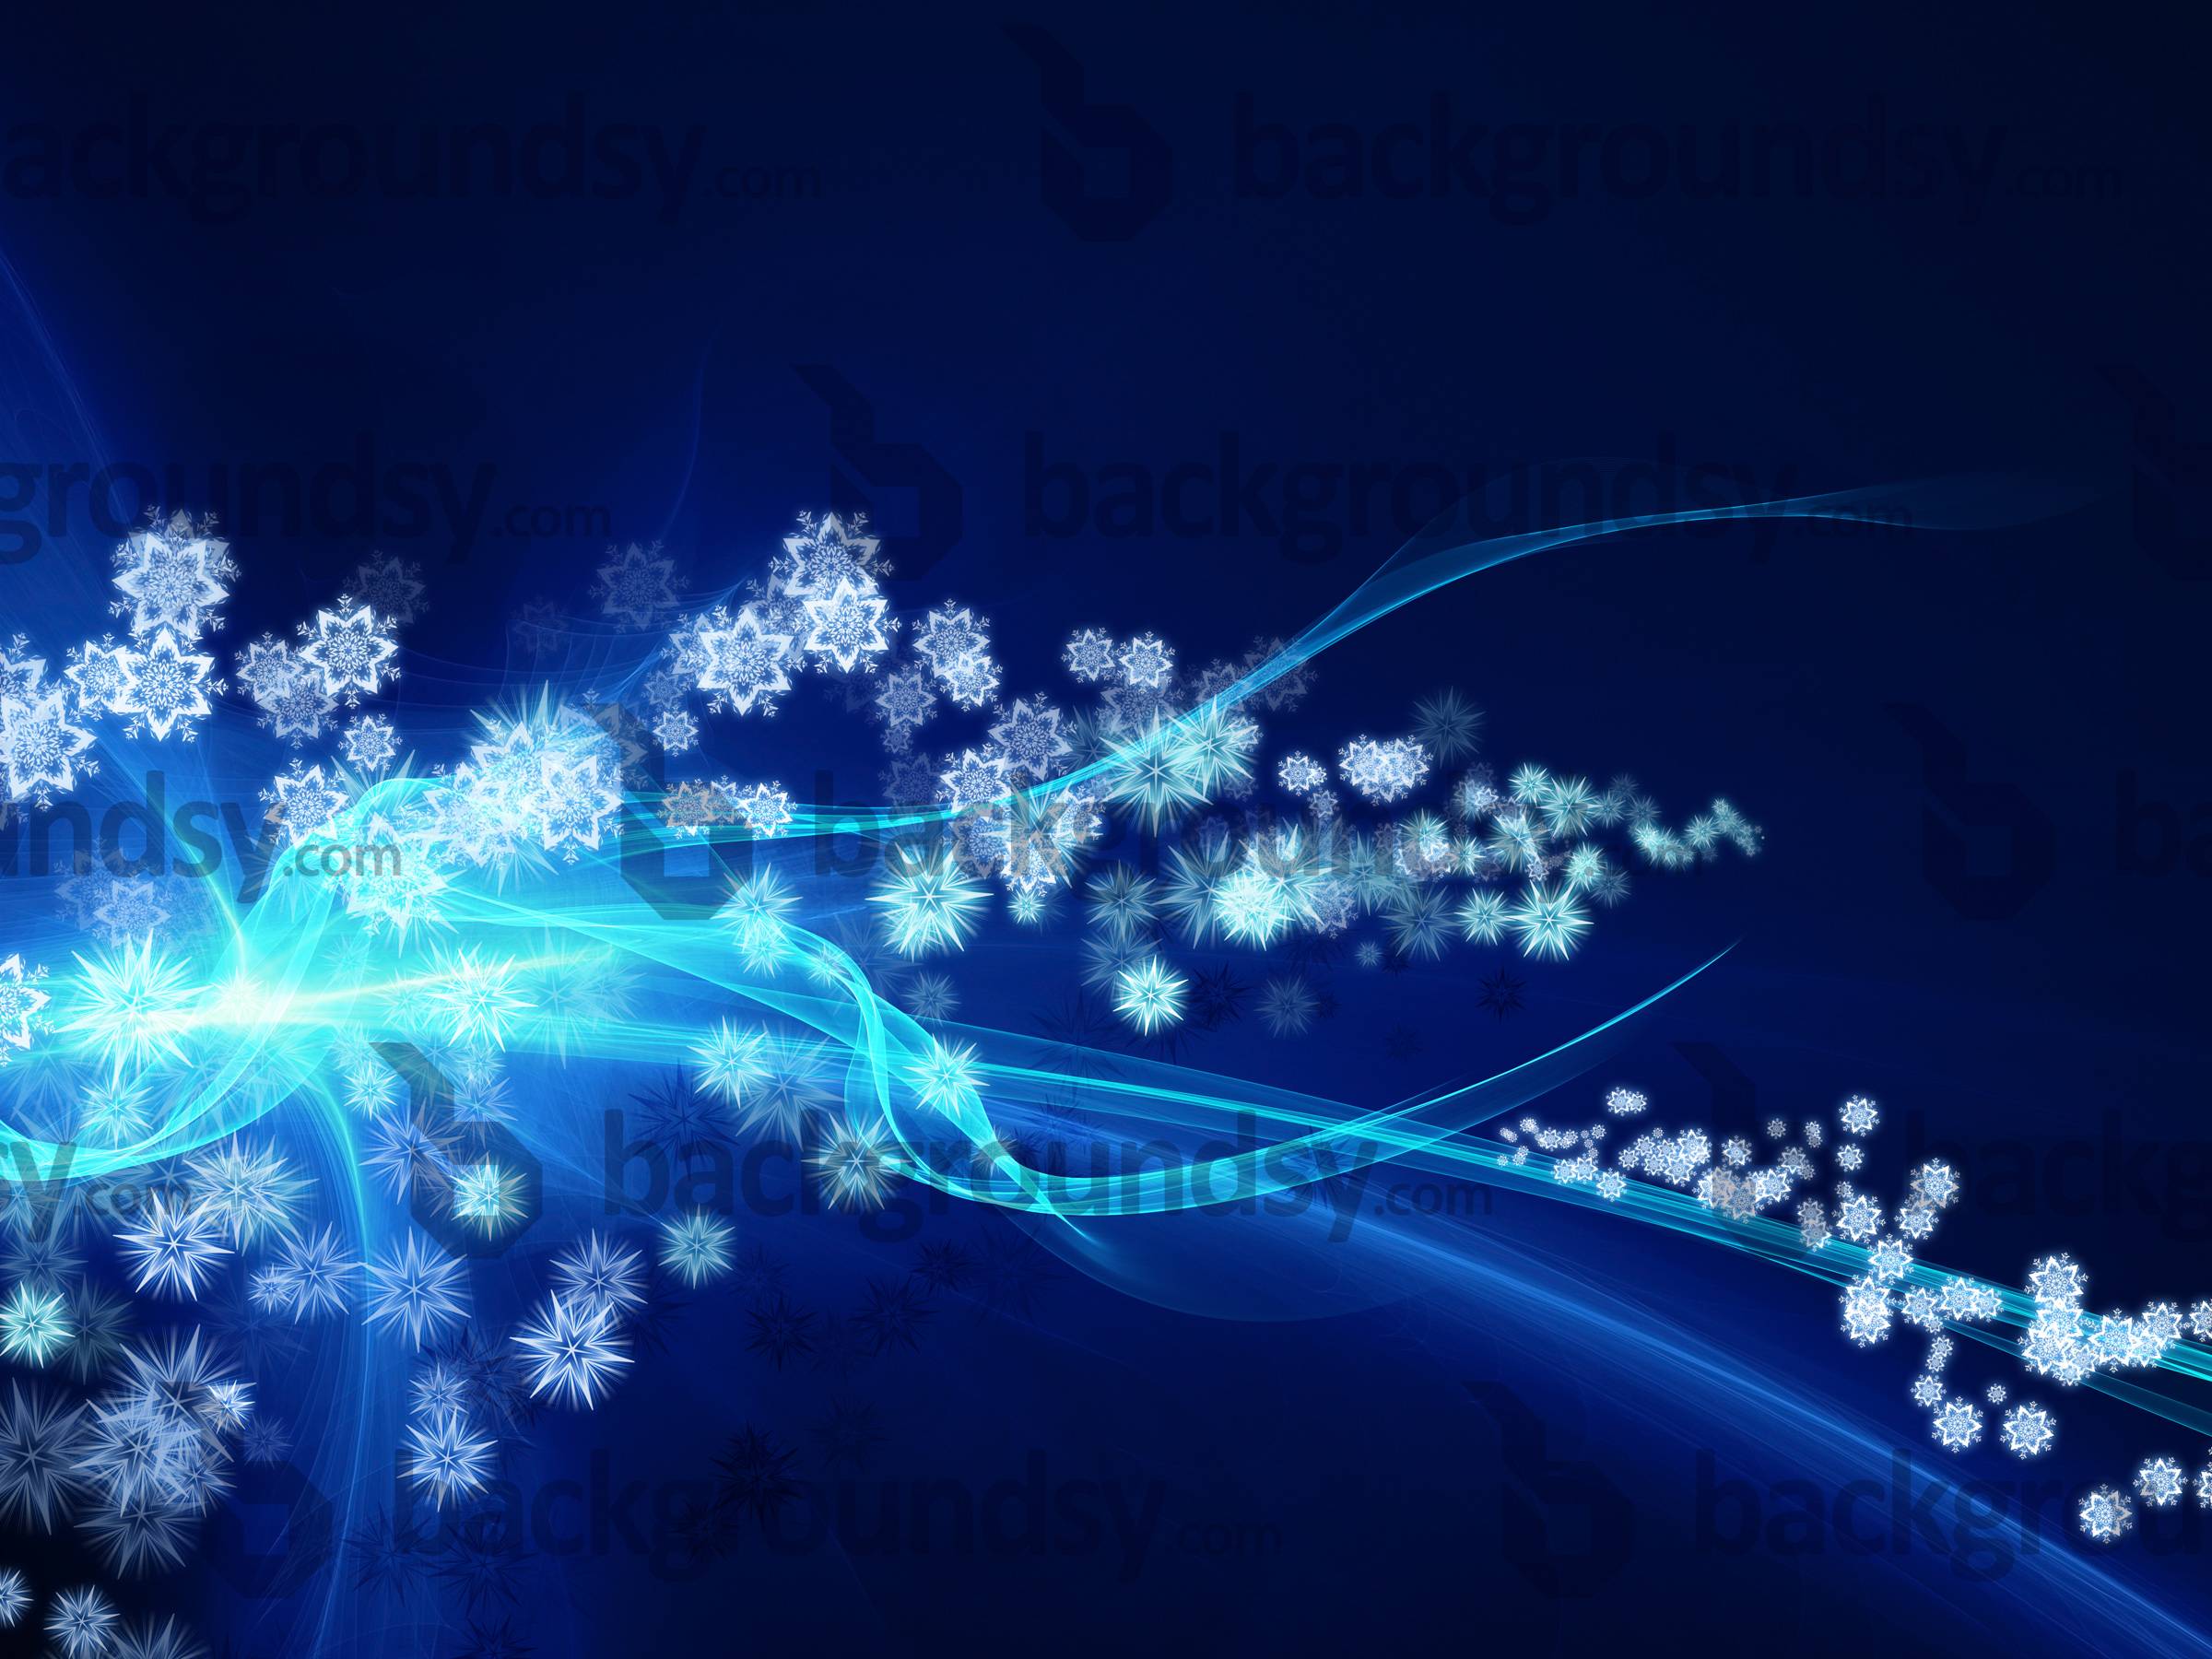 Wallpaper For > Snowflakes Background